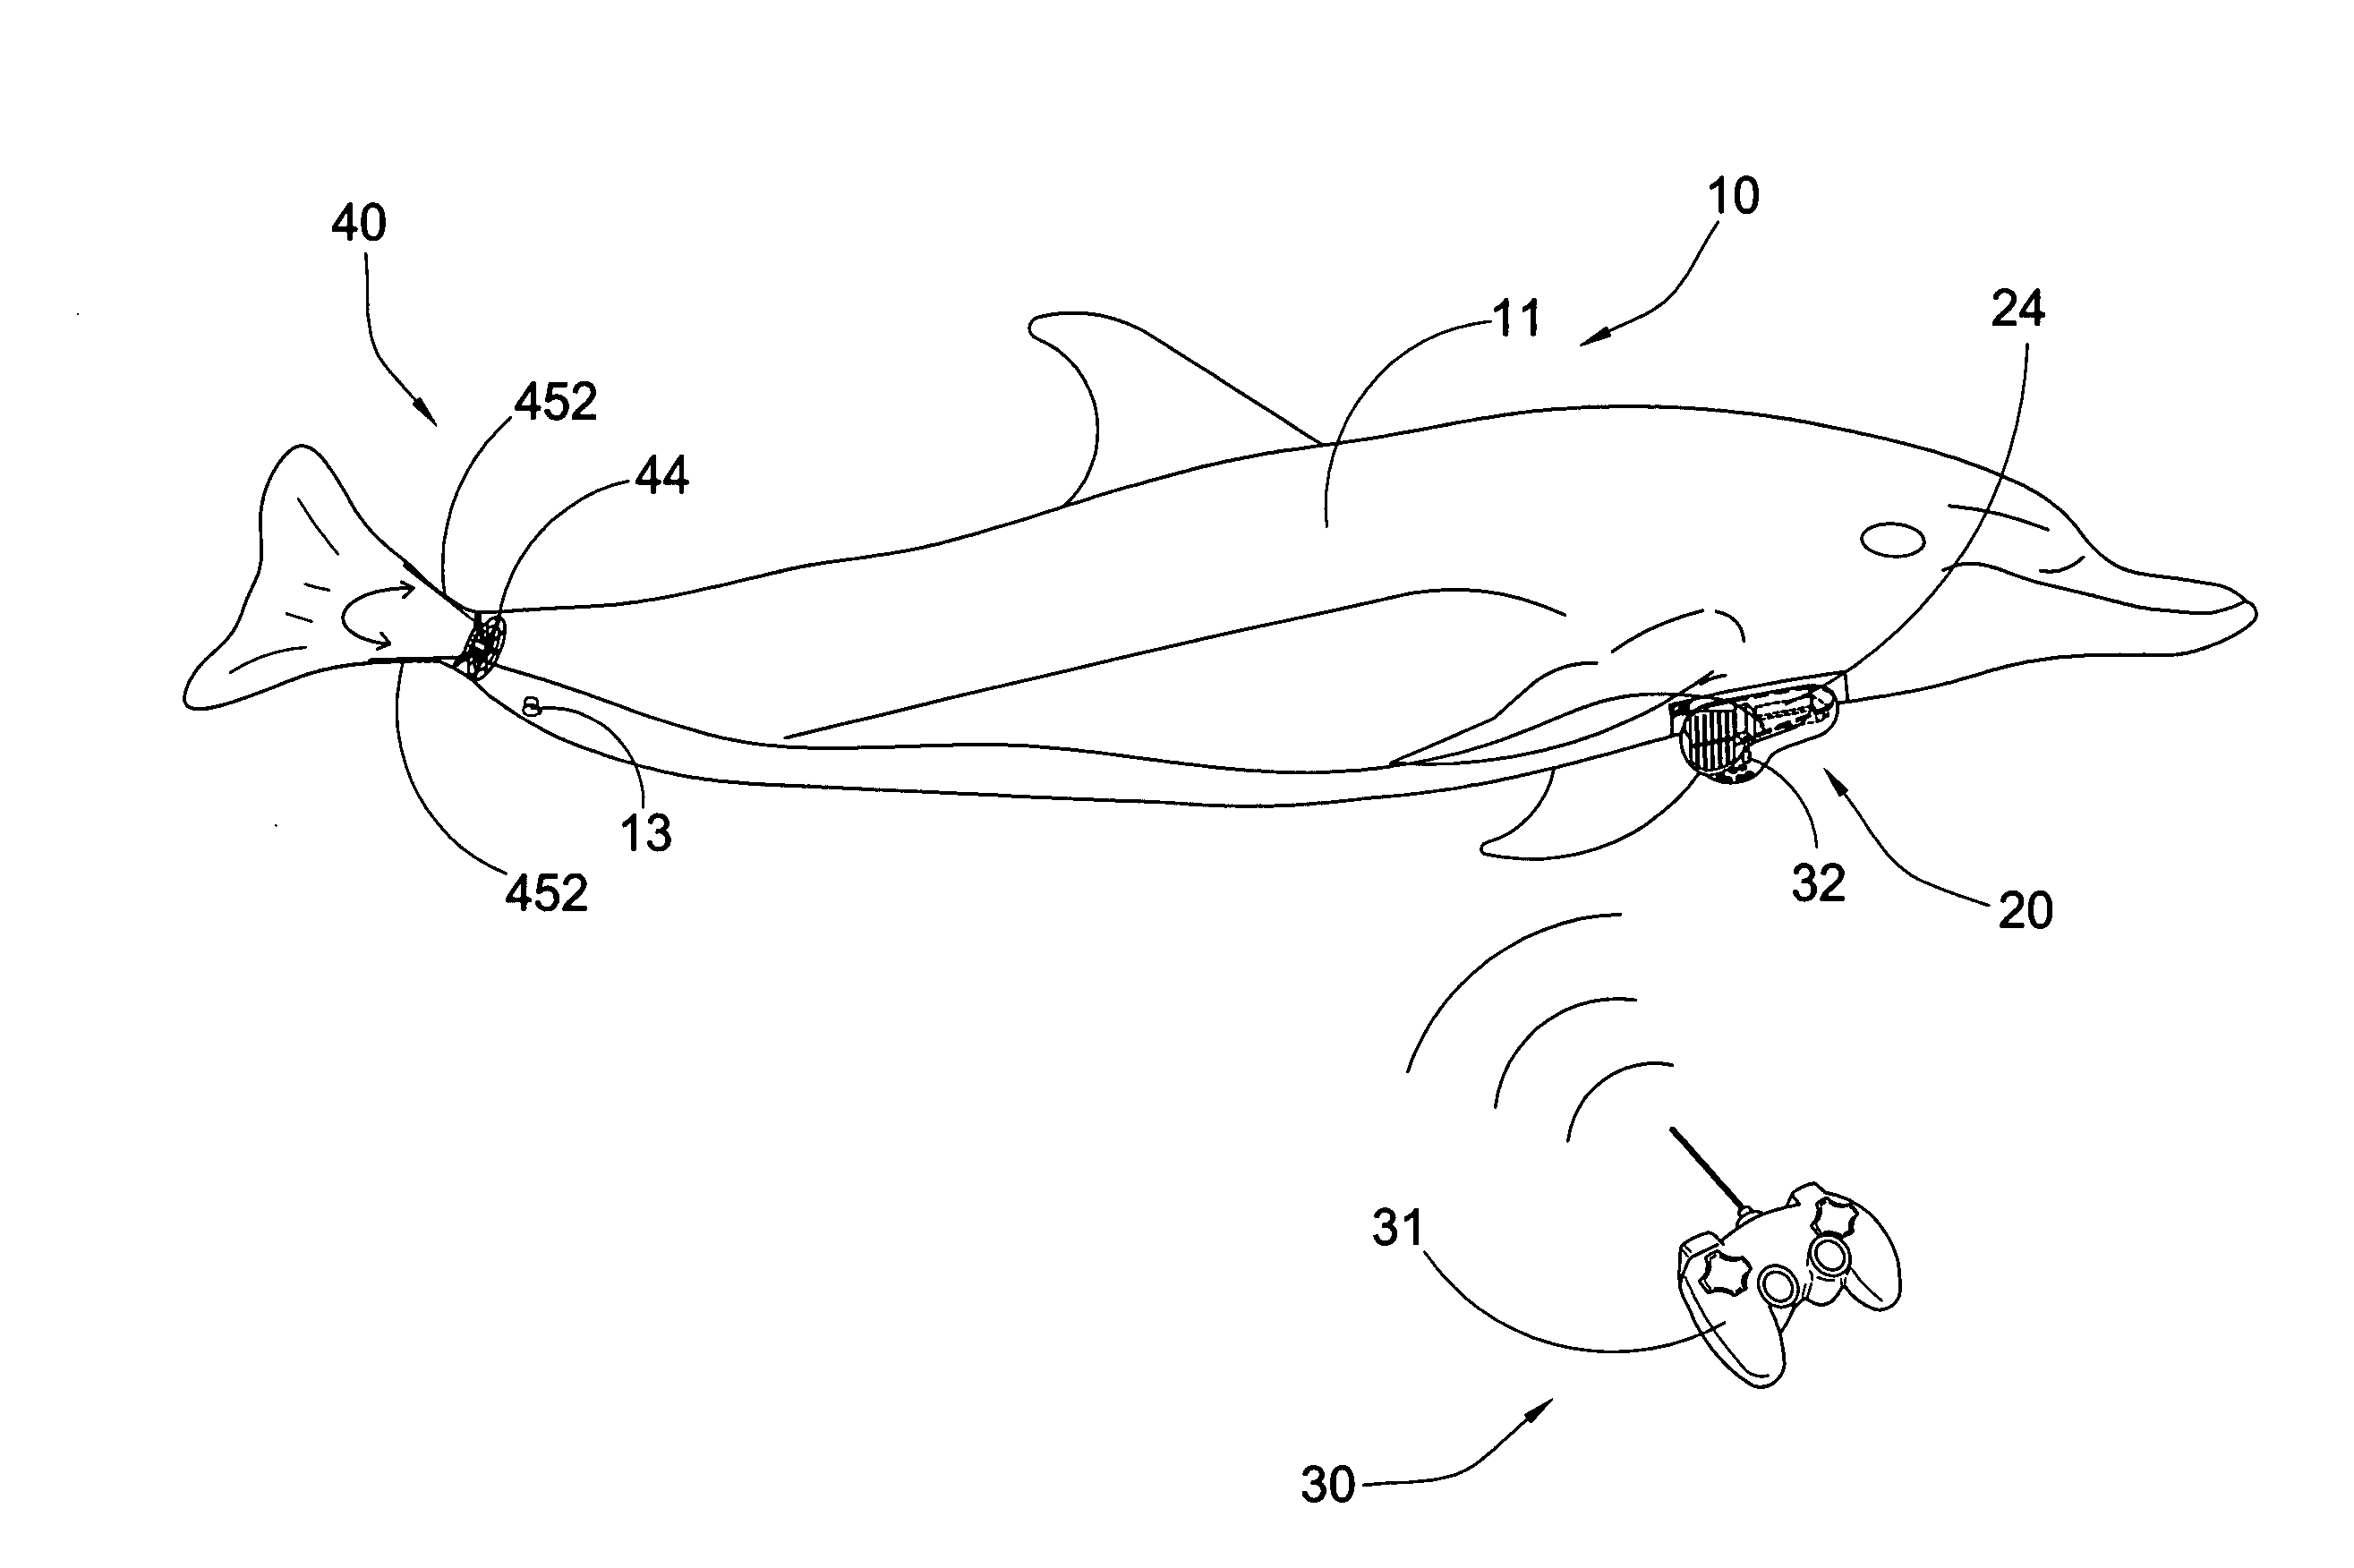 Air swimming toy with steering device